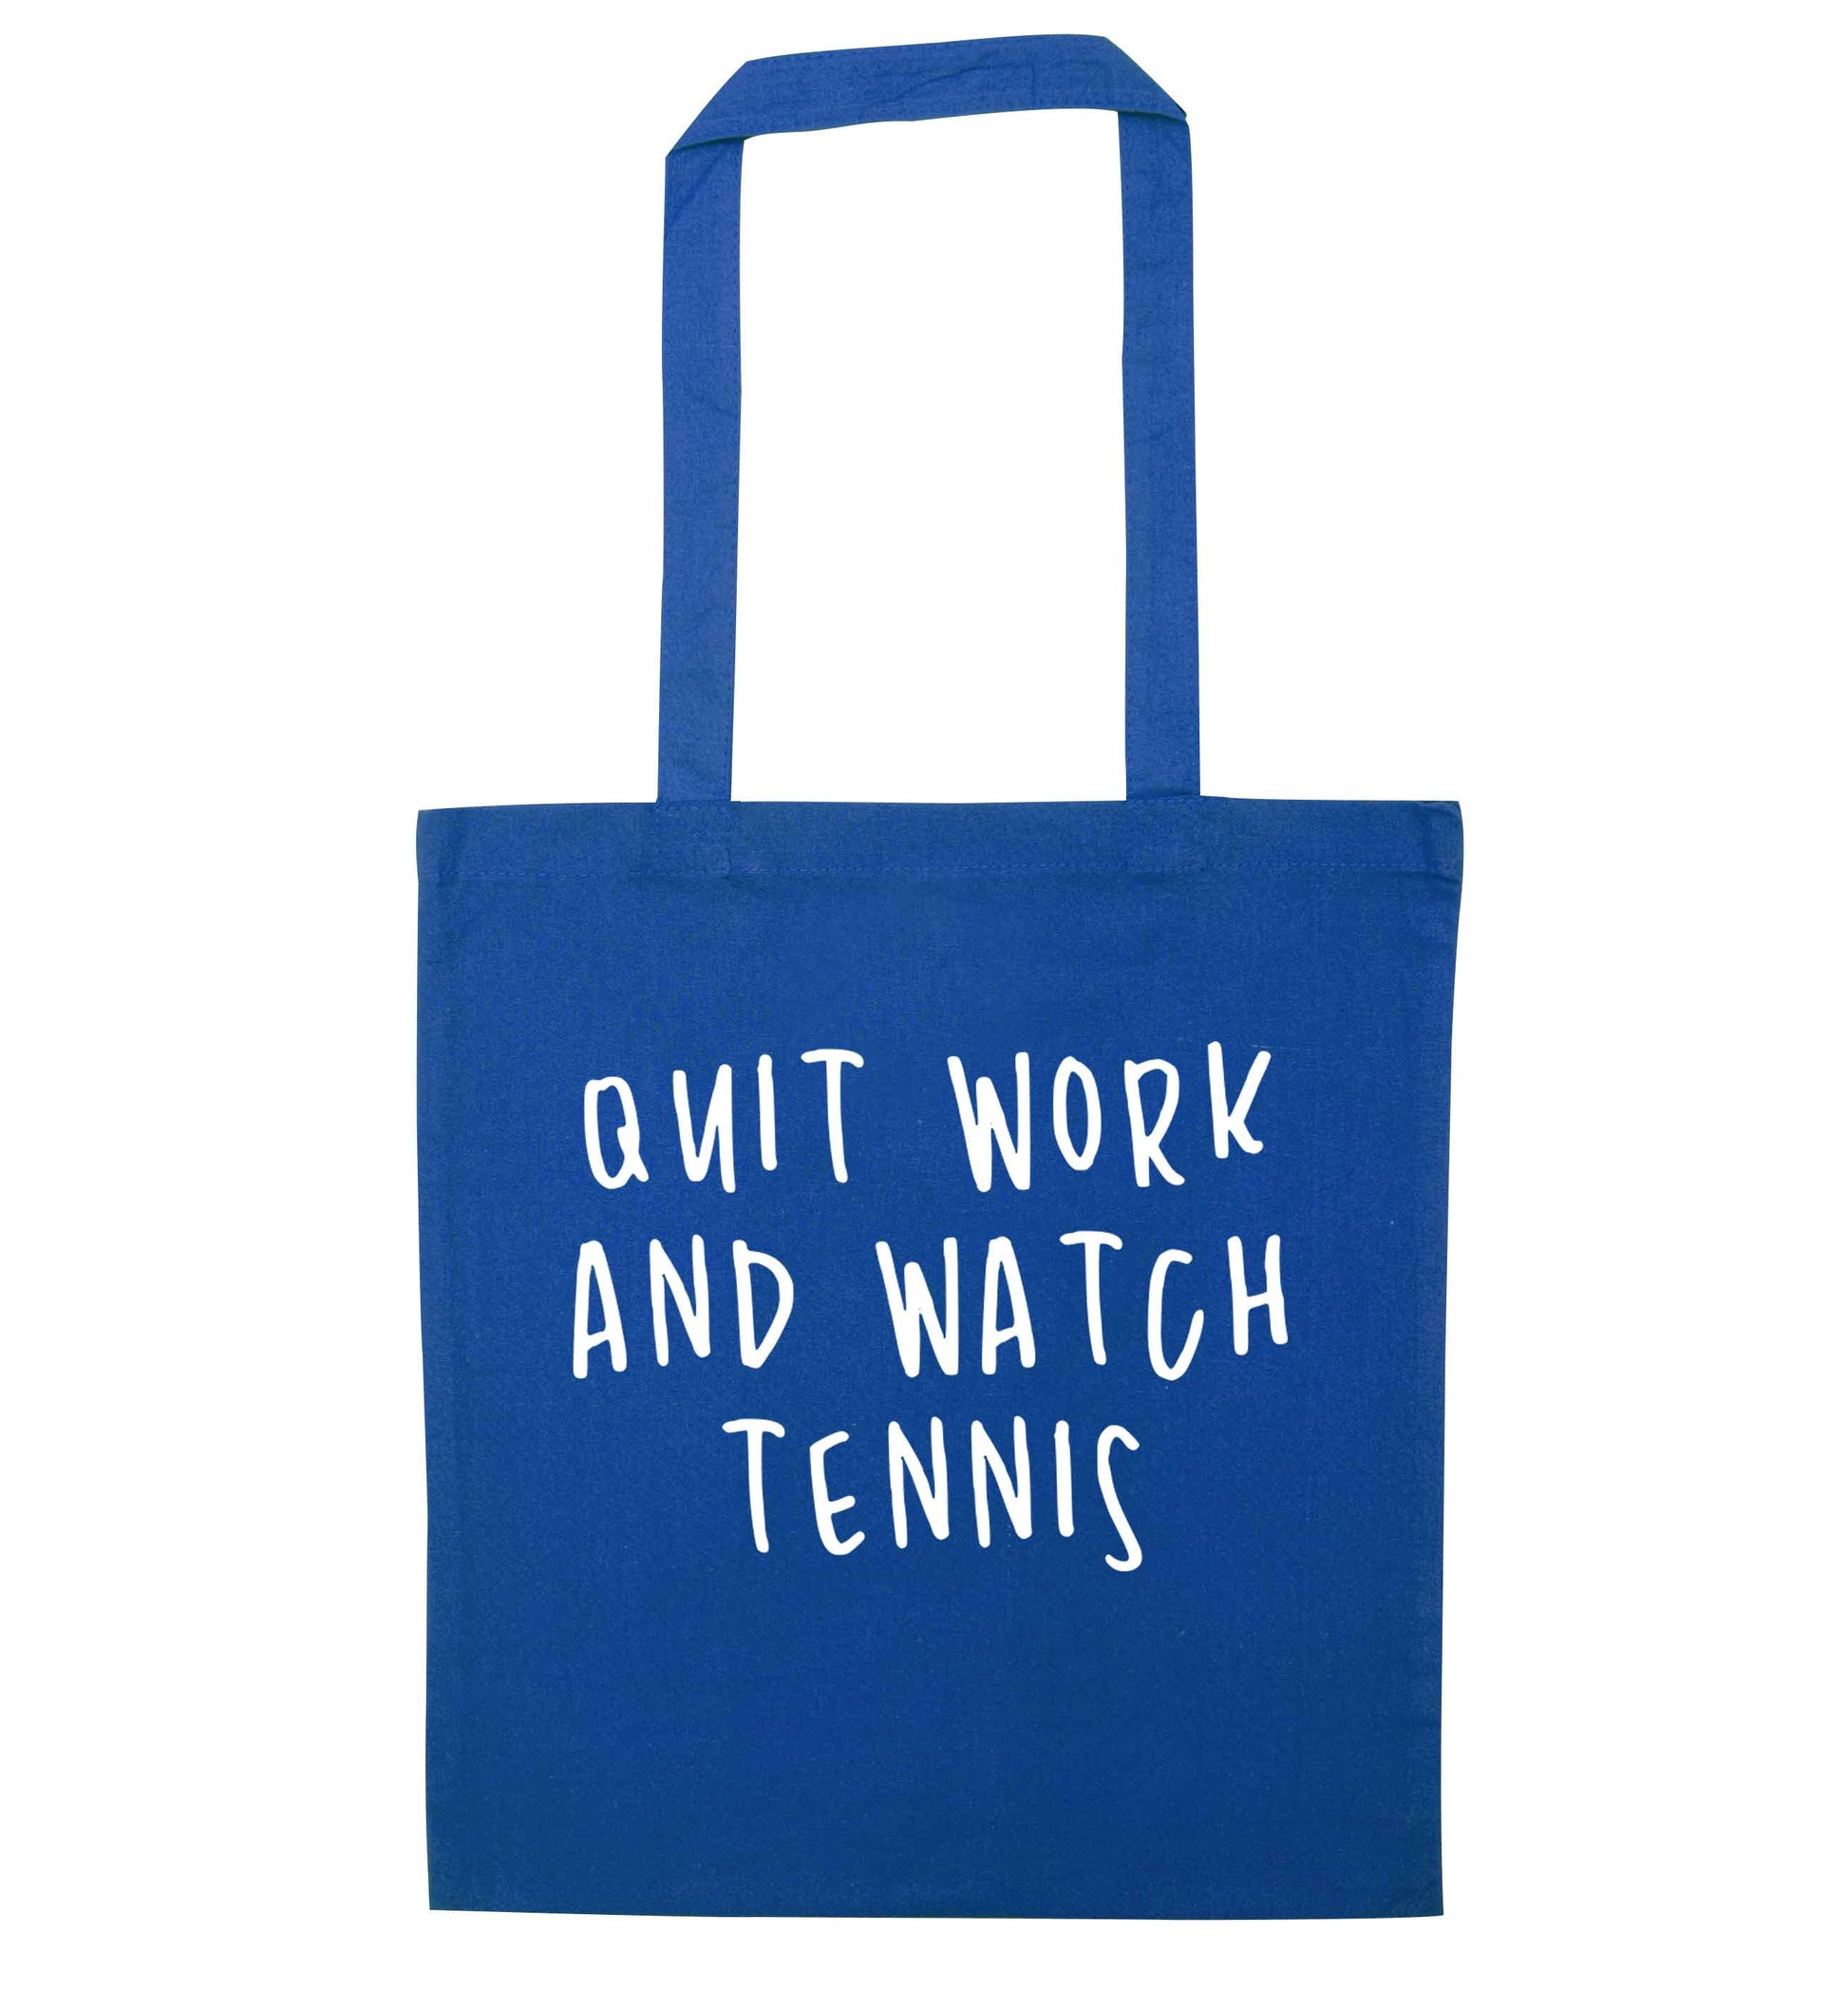 Quit work and watch tennis blue tote bag